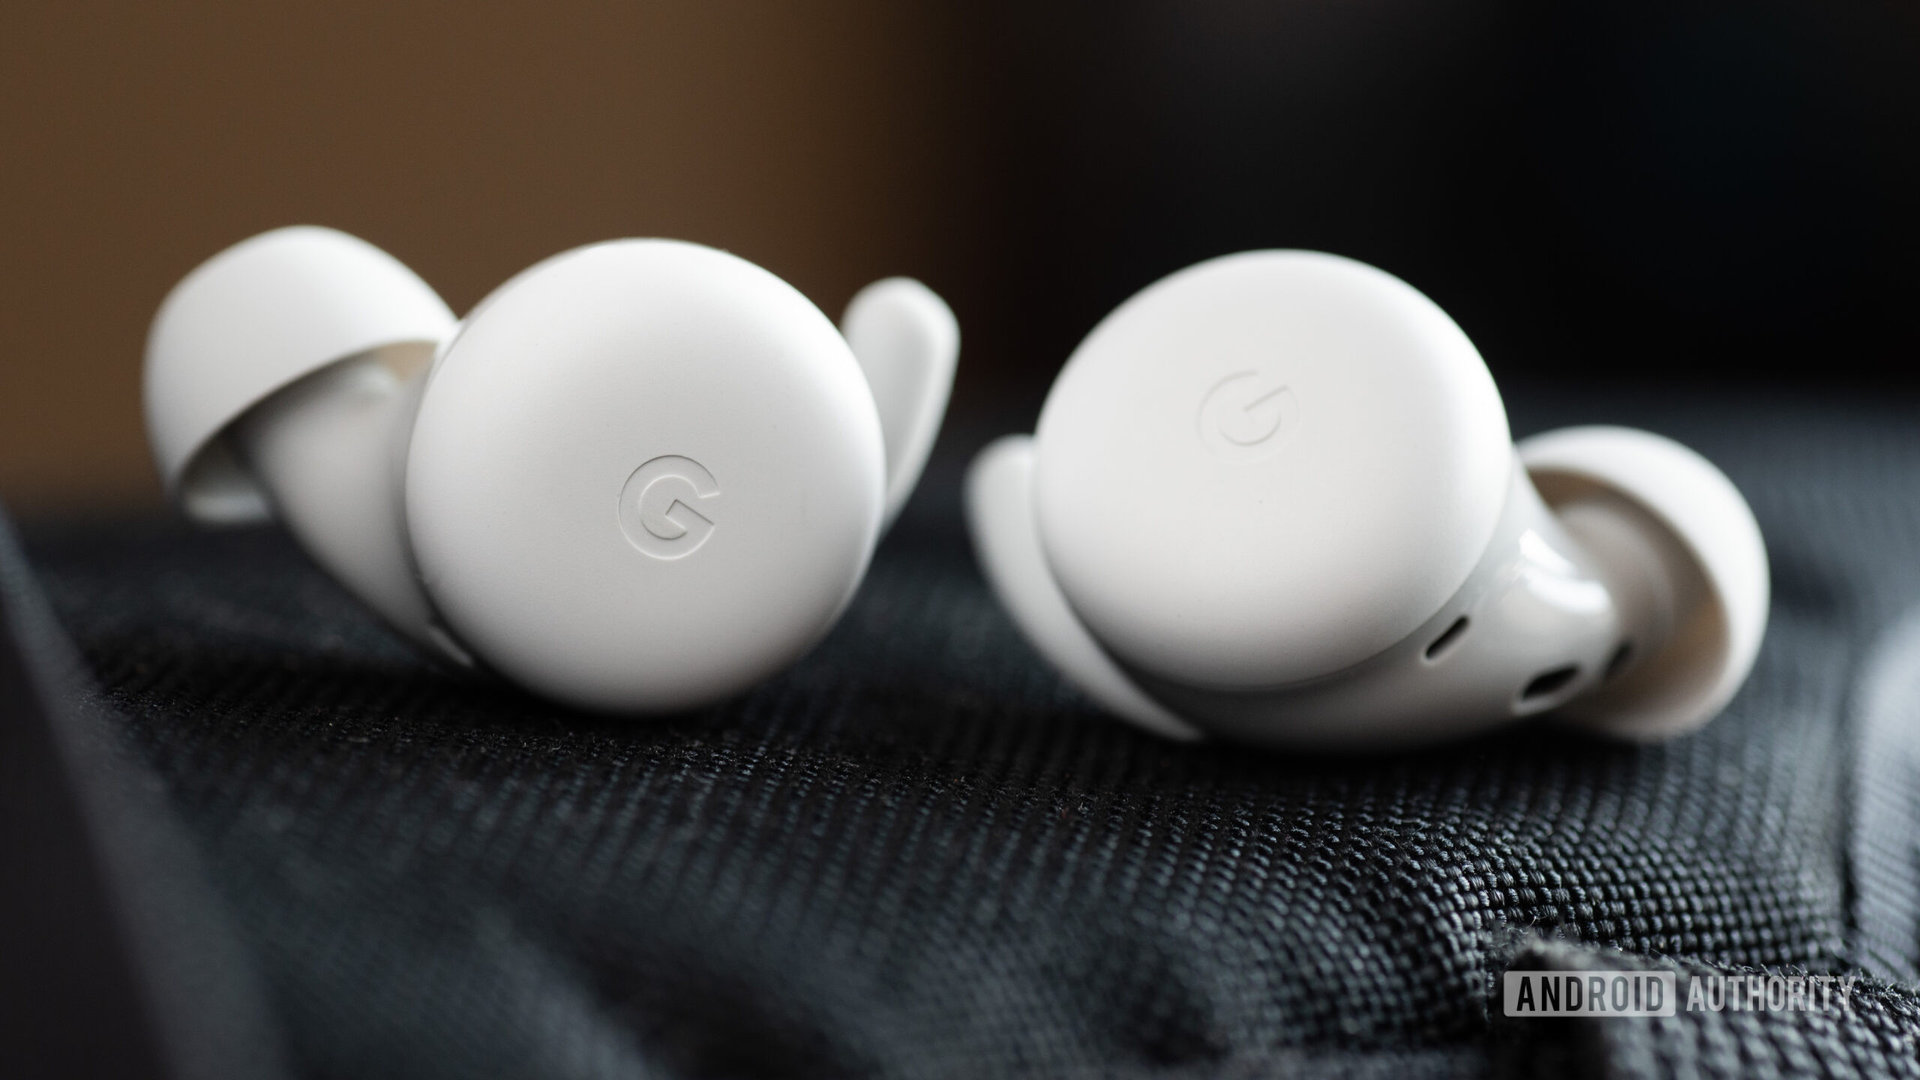 The Google Pixel Buds A Series earbuds and wings.